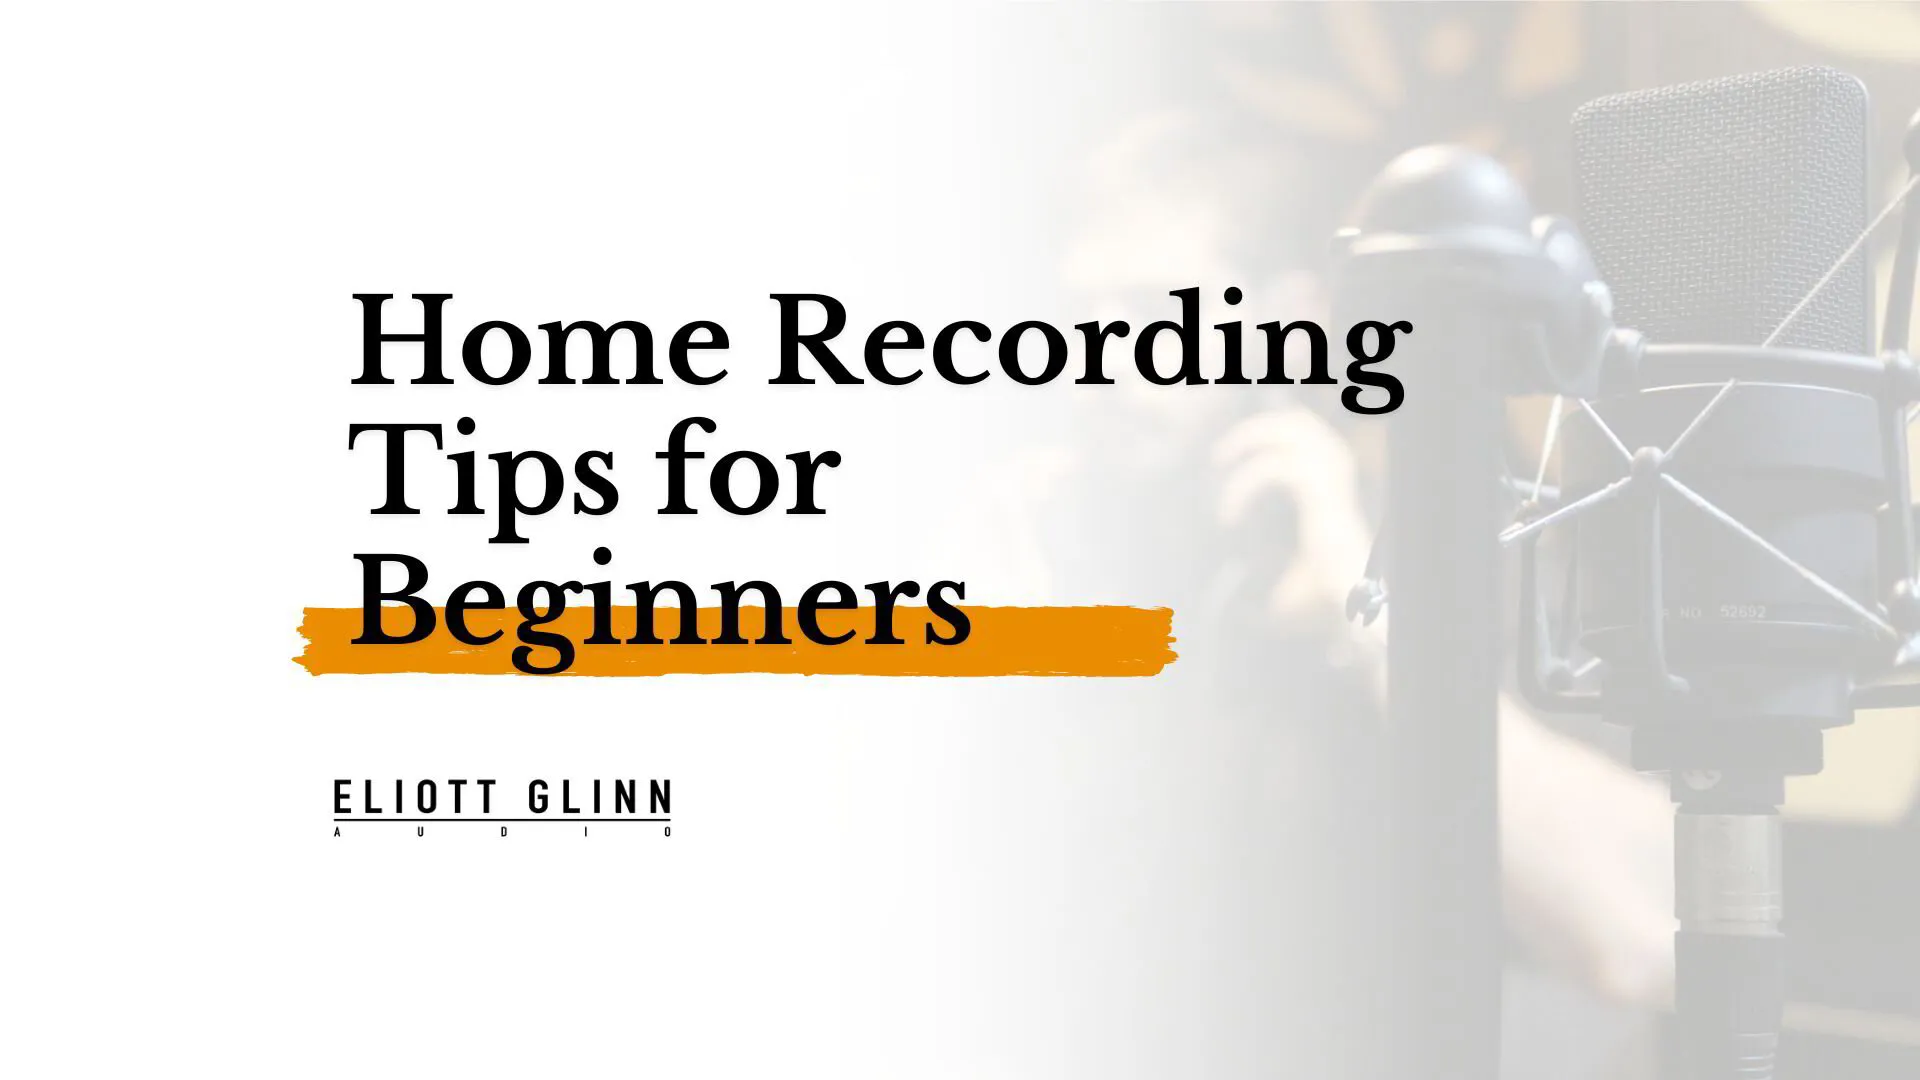 Home Recording Tips for Beginners